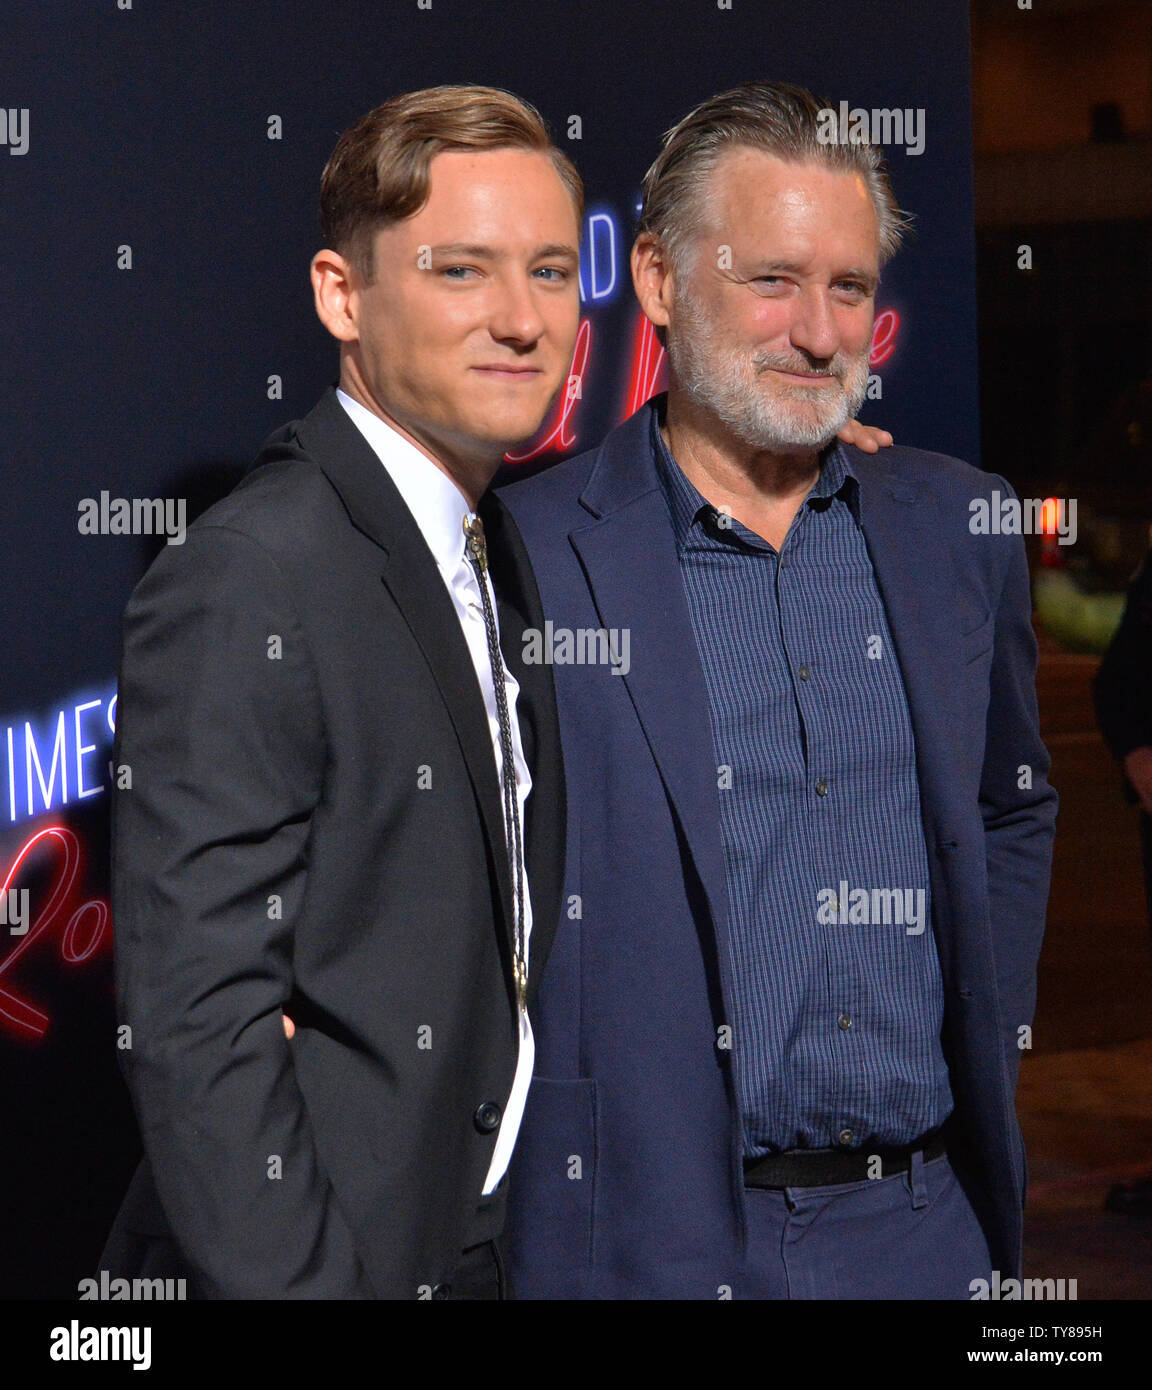 Cast Member Lewis Pullman And His Father Actor Bill Pullman Attend The Premiere Of The Motion